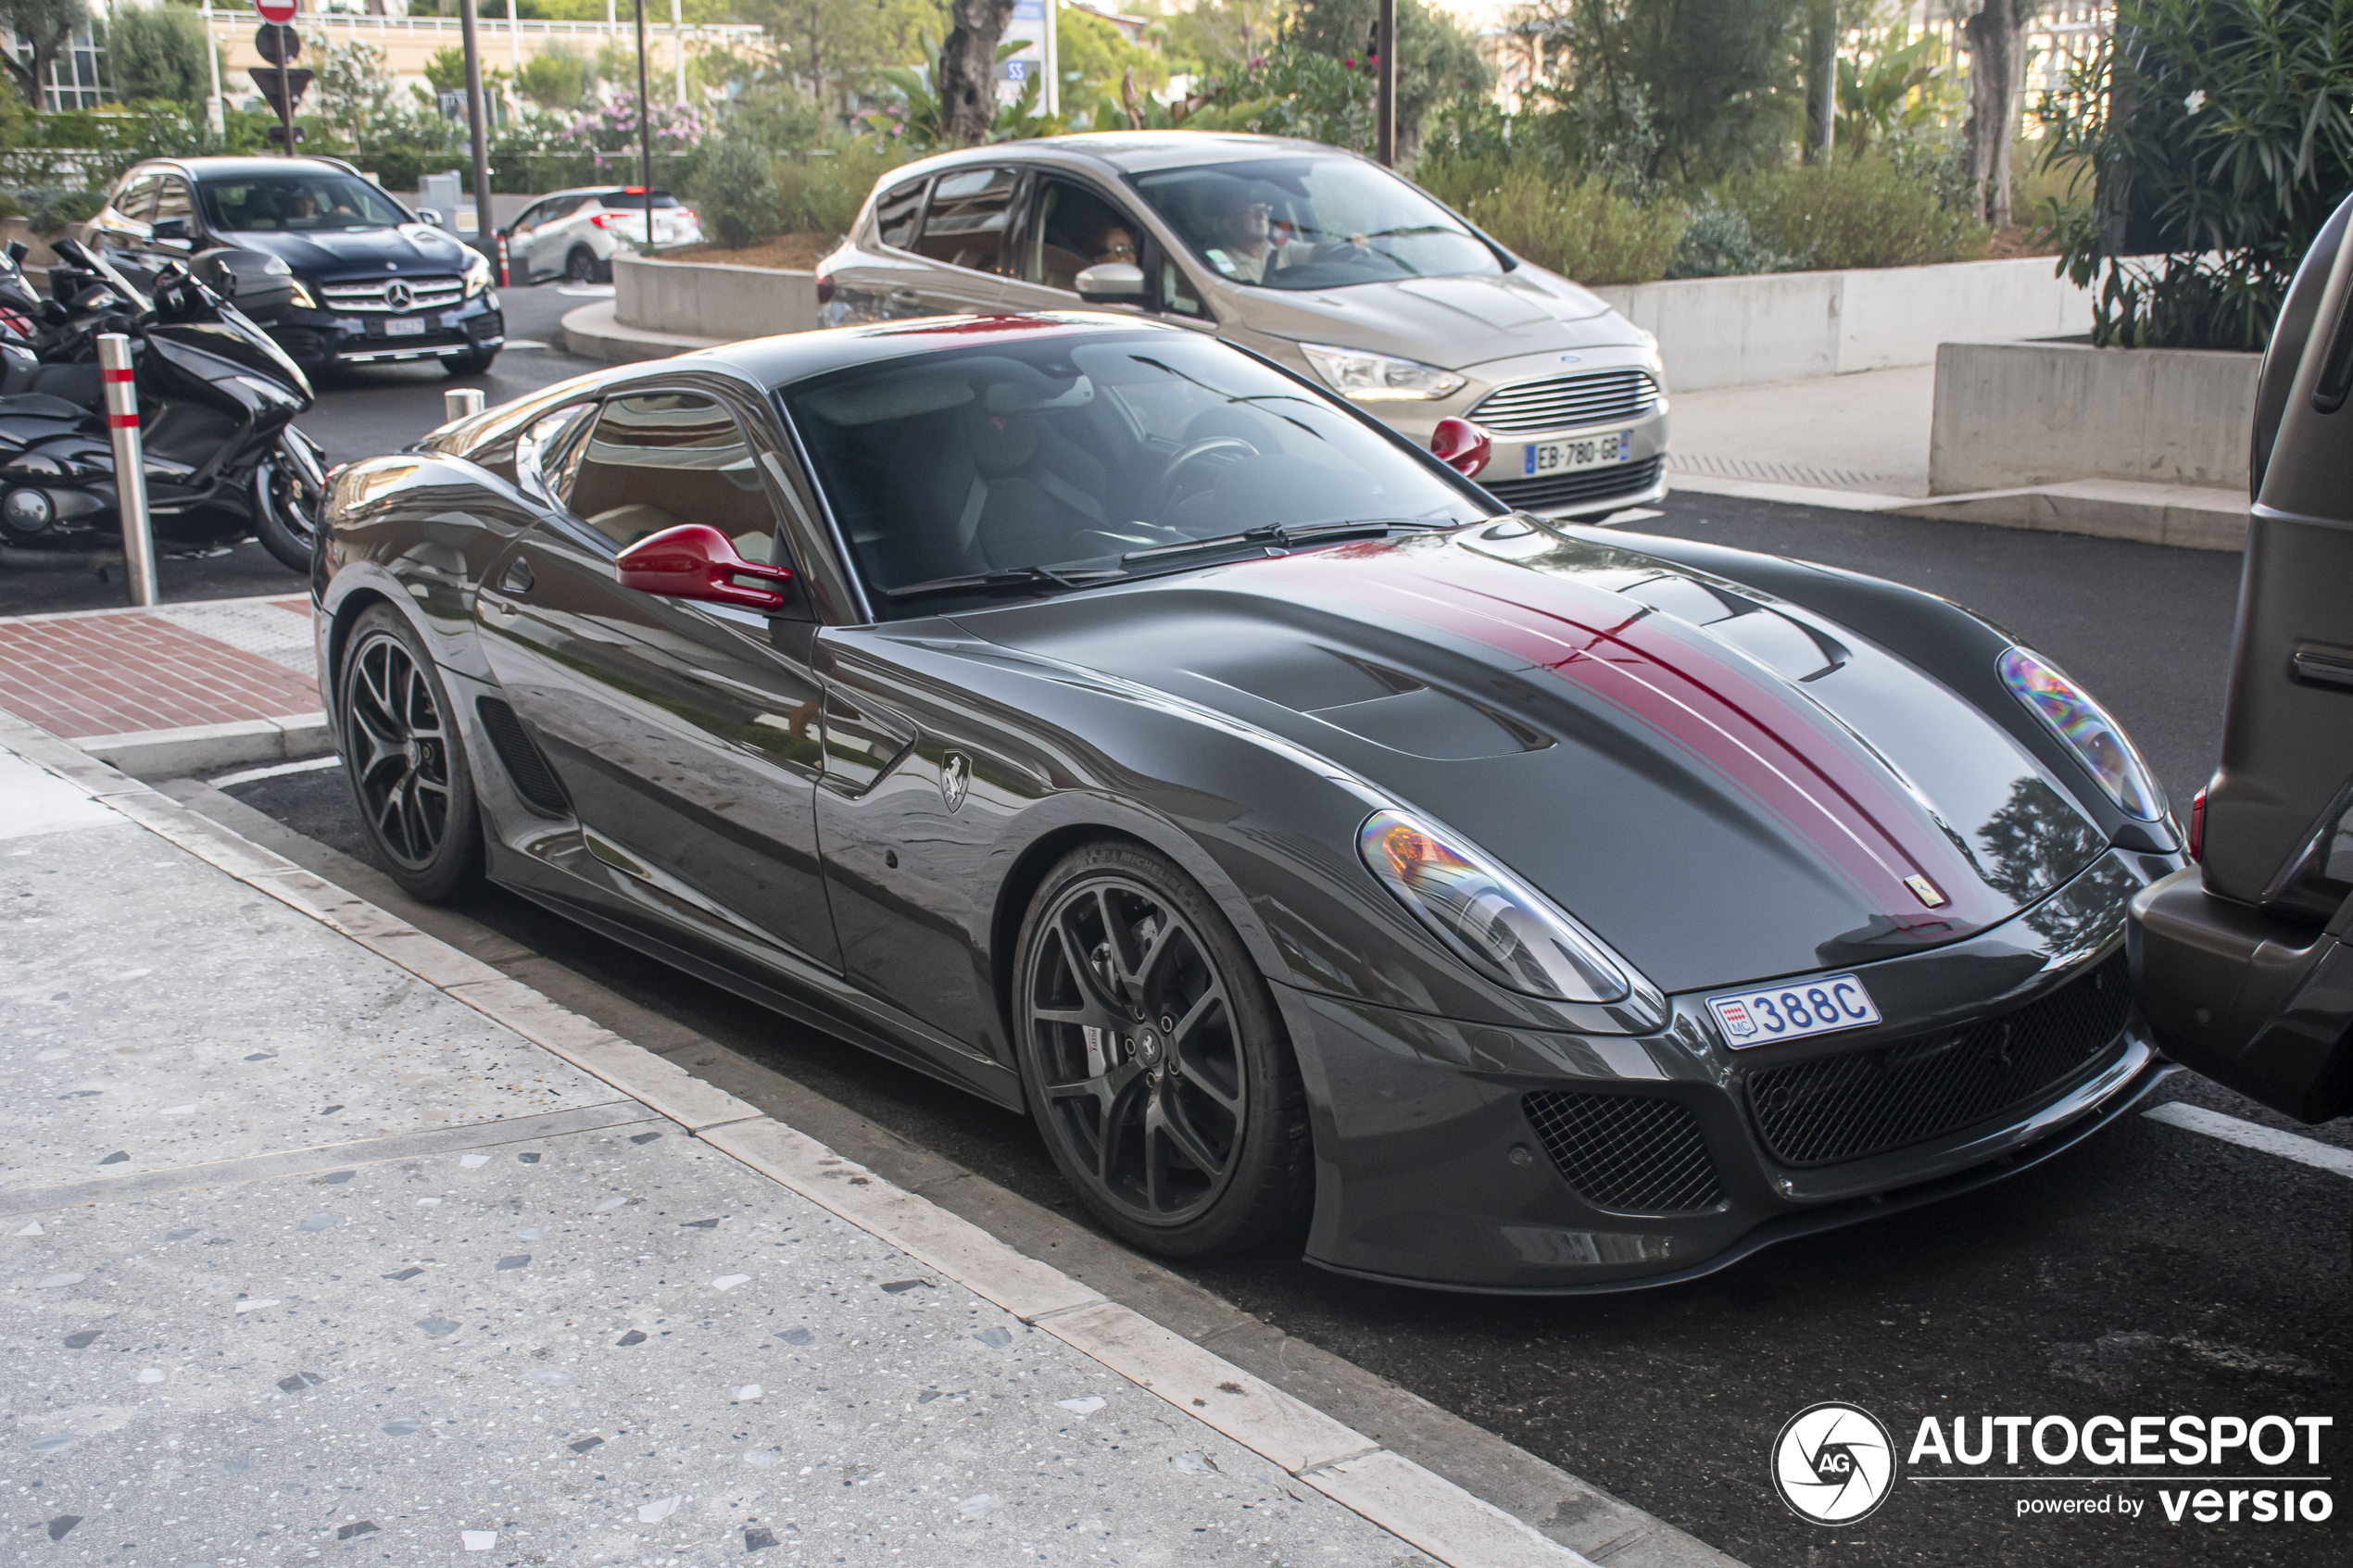 A perfect looking Ferrari 599 GTO shows up in Monao